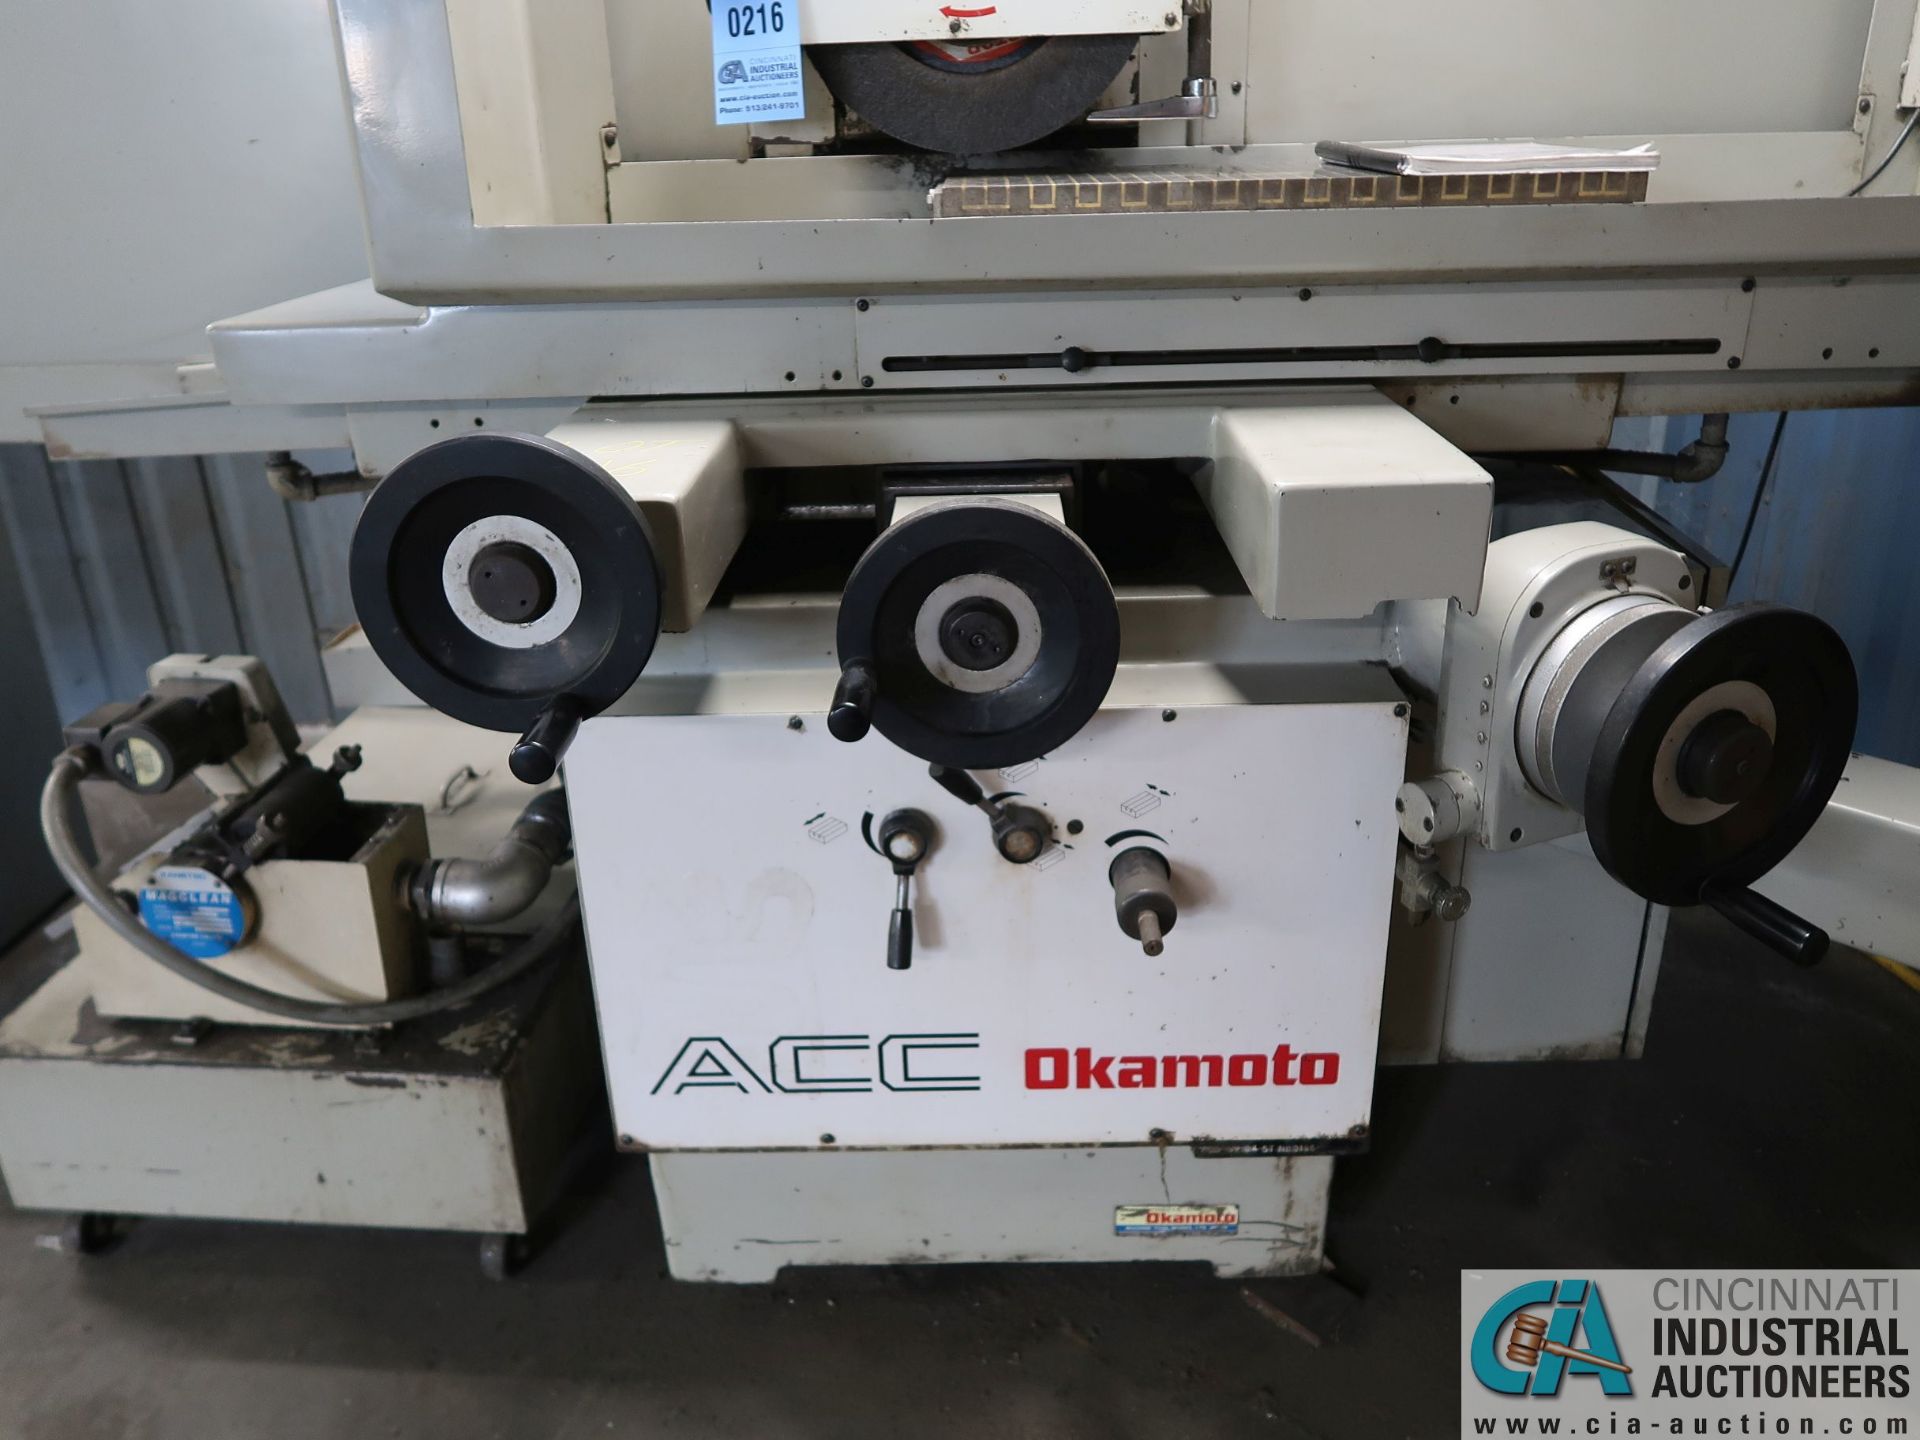 12" X 24" OKAMOTO MODEL 12-24ST HYDRAULIC PRECISION SURFACE GRINDING MACHINE; S/N 3126 - Image 3 of 10